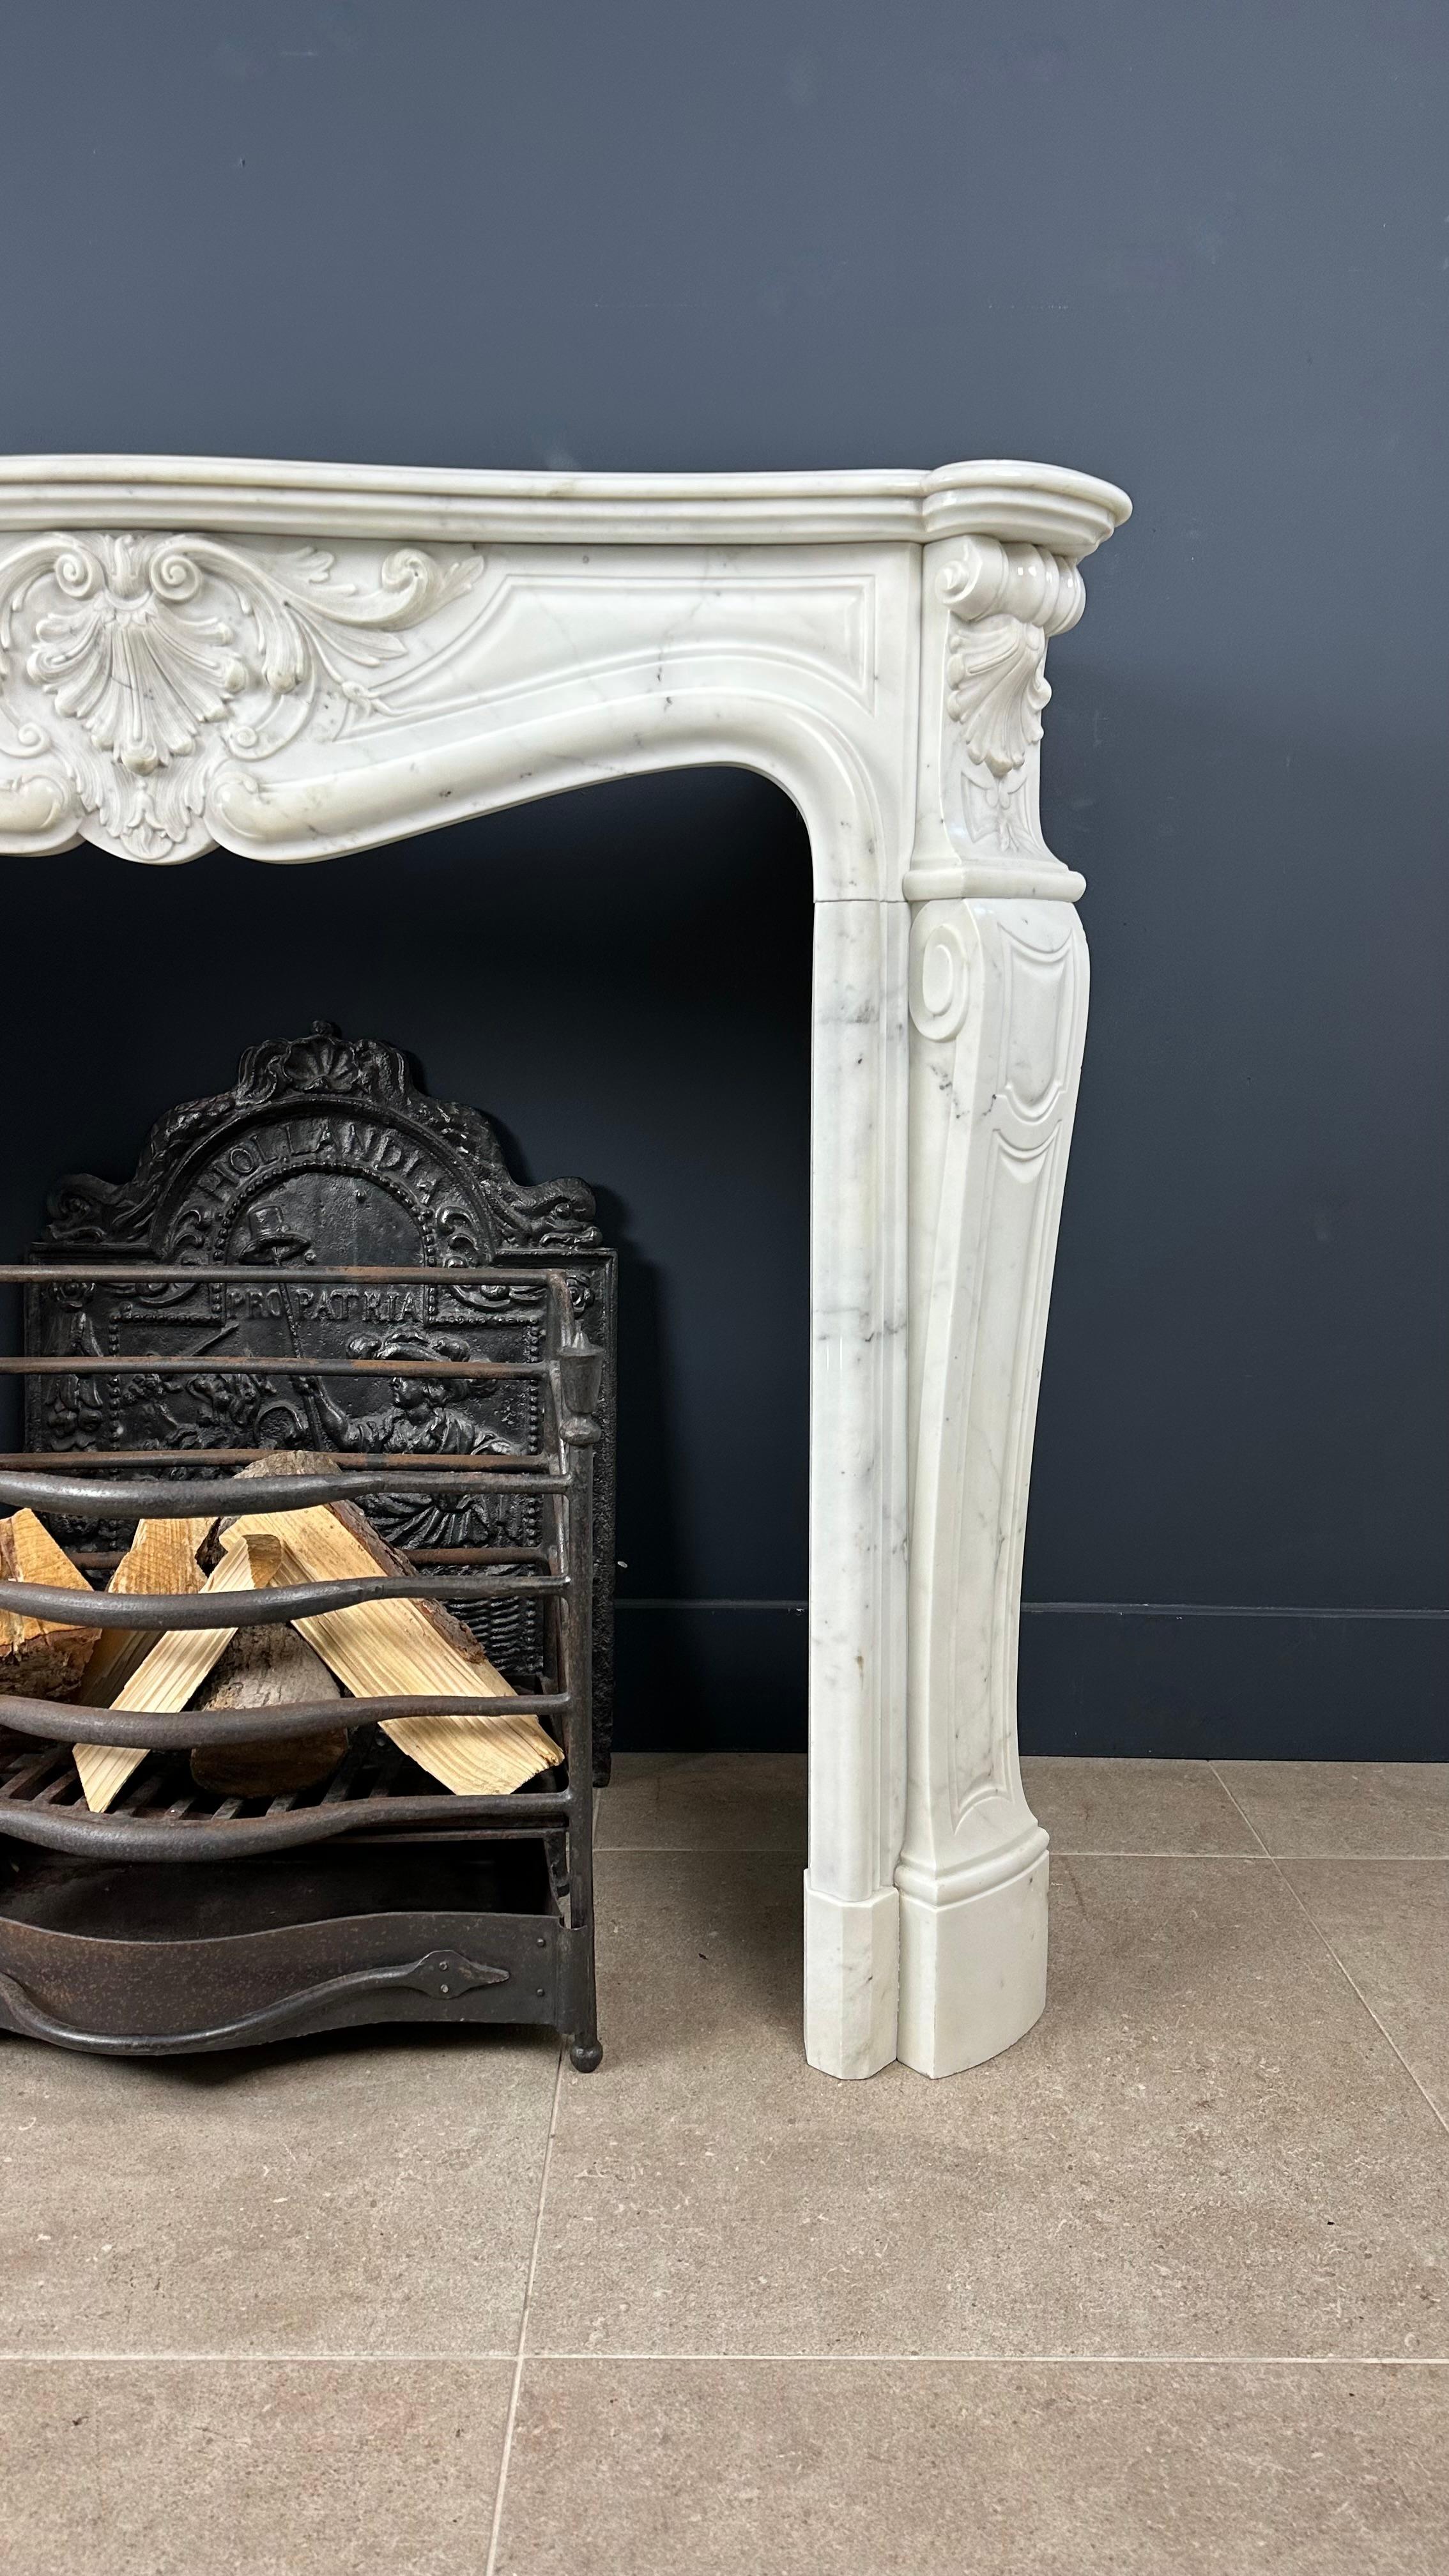 Interlace your space with the enchanting charm of our French antique shell fireplace, a masterpiece infused with history and style. Using precious Carrara marble, this fireplace offers a timeless allure and a rich sense of heritage.

The heart of